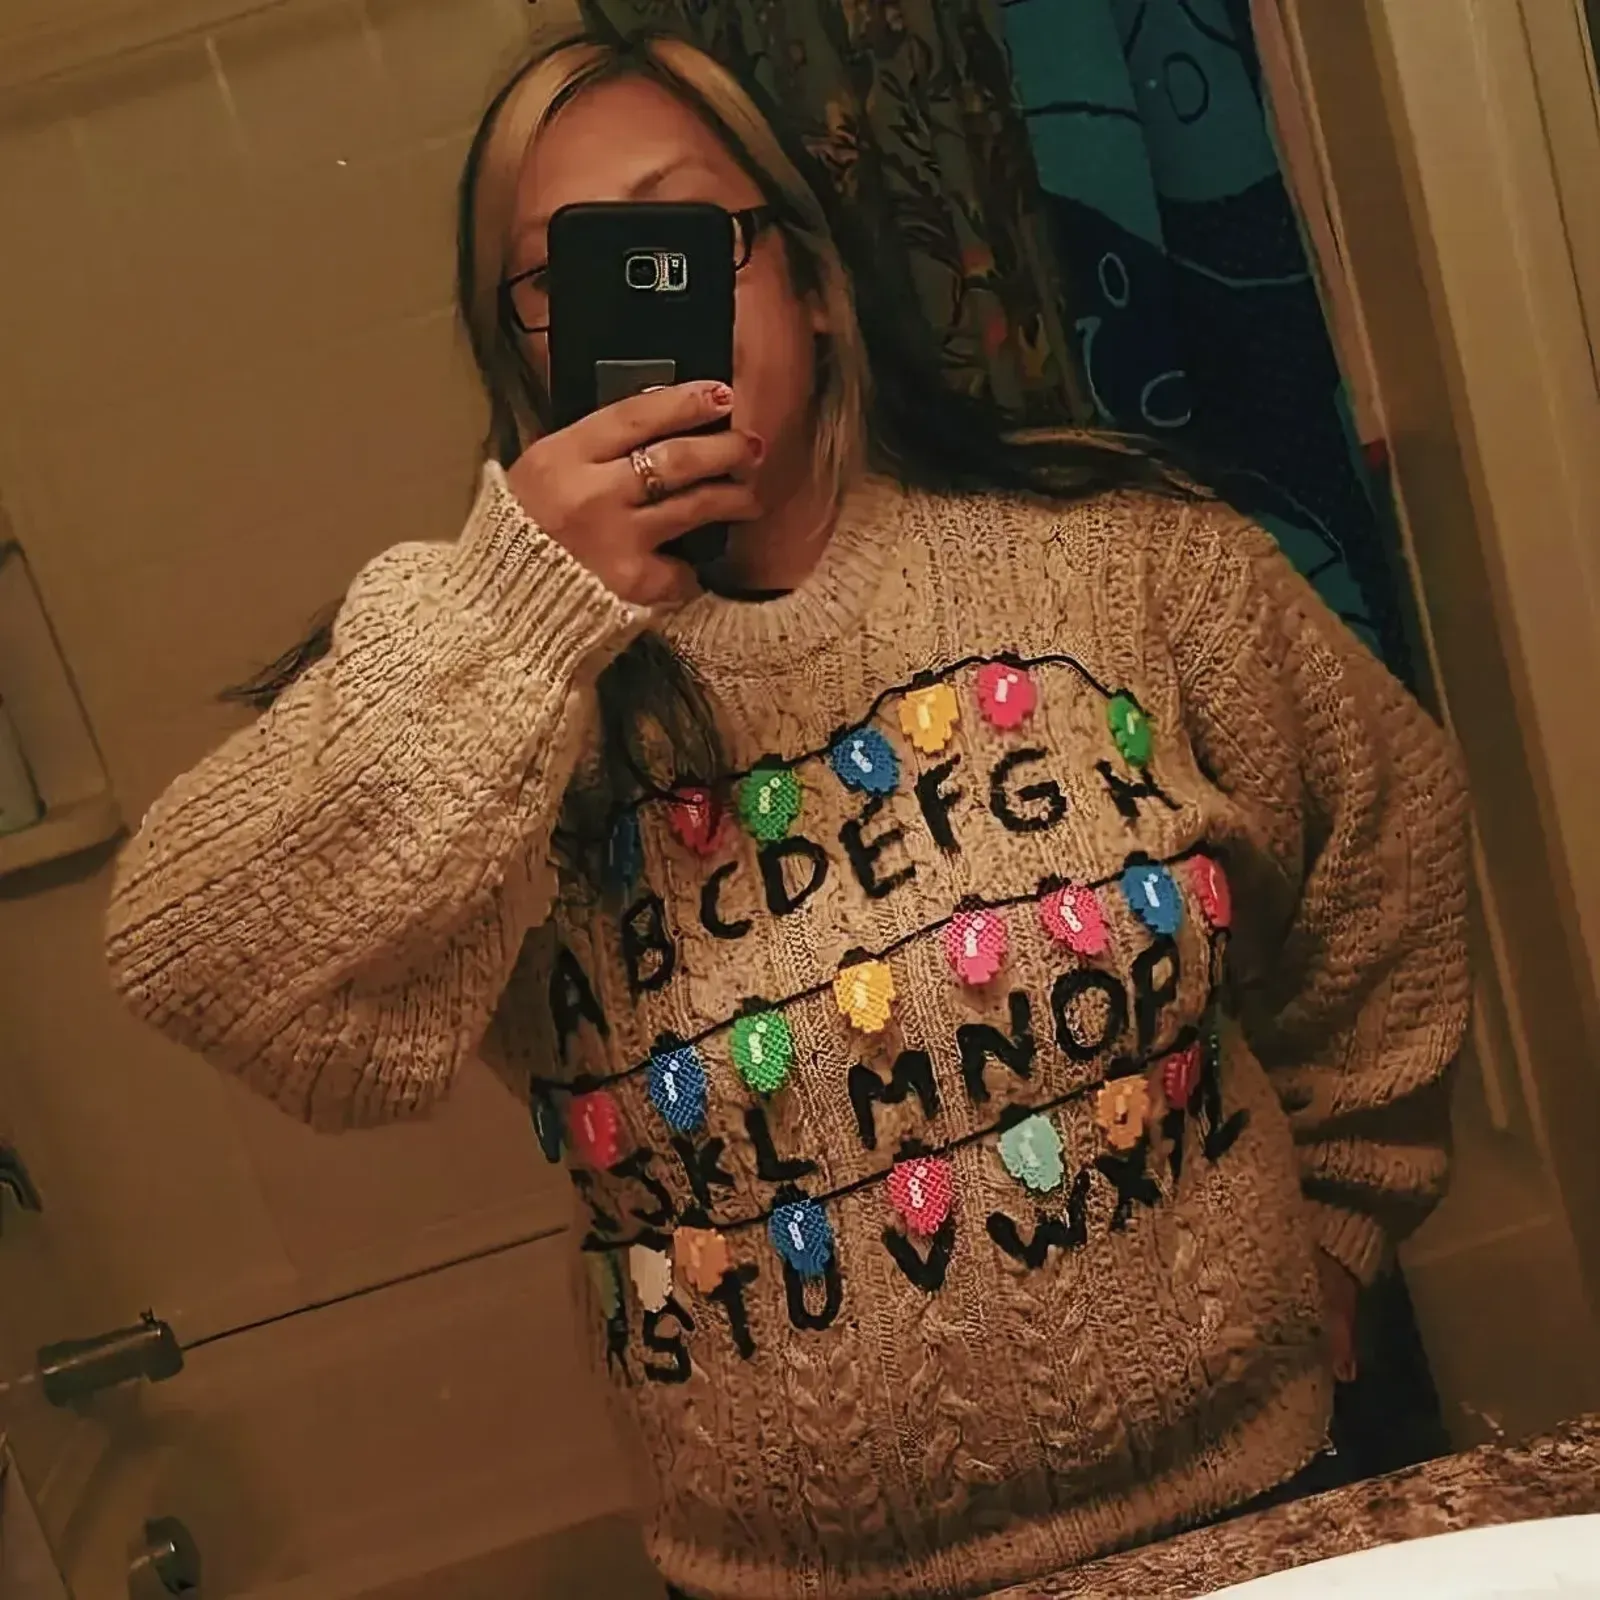 Fashionable woman taking a selfie in a mirror with a handmade ugly Christmas sweater